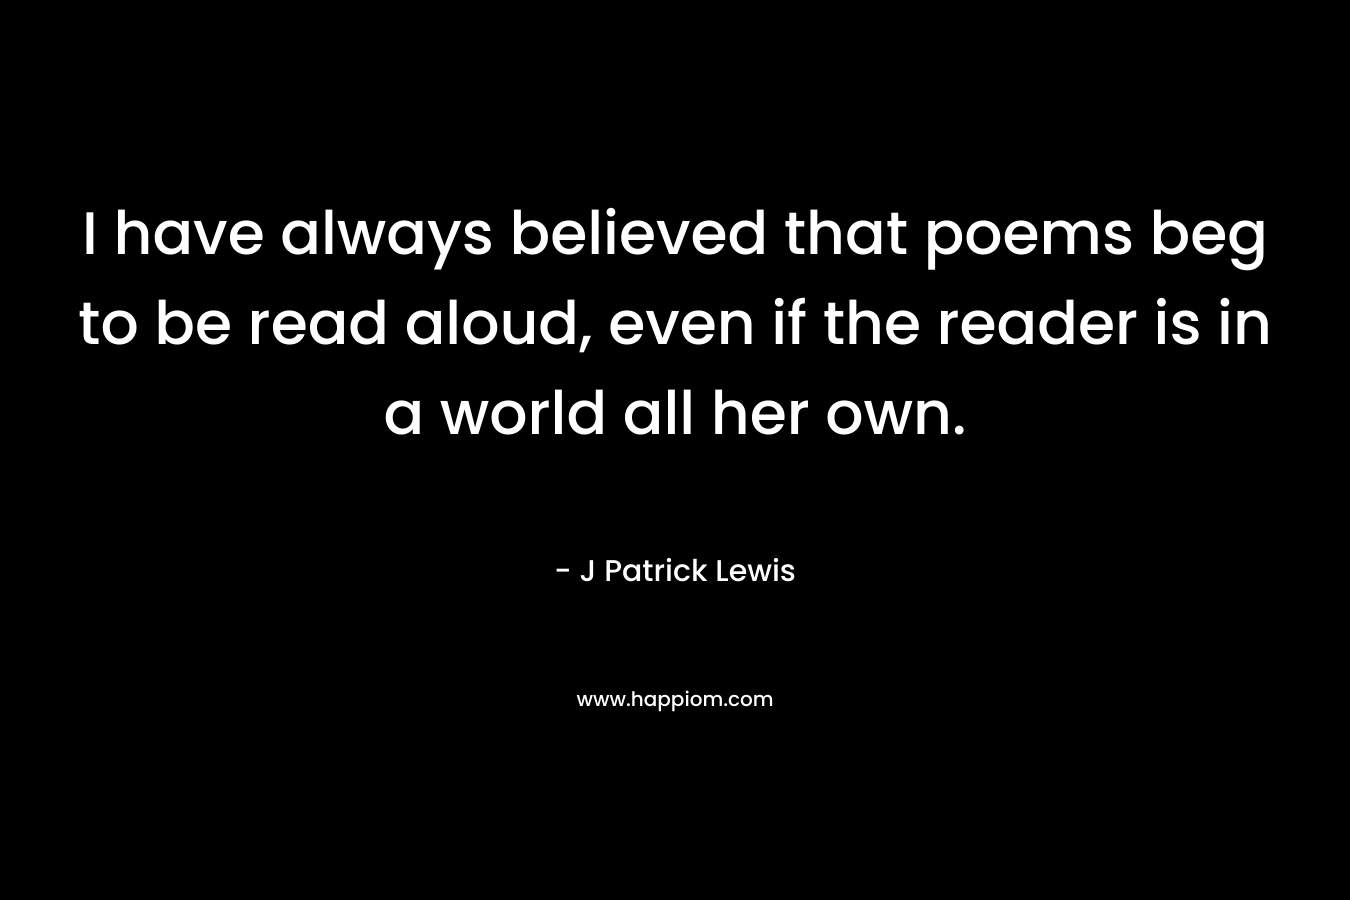 I have always believed that poems beg to be read aloud, even if the reader is in a world all her own.